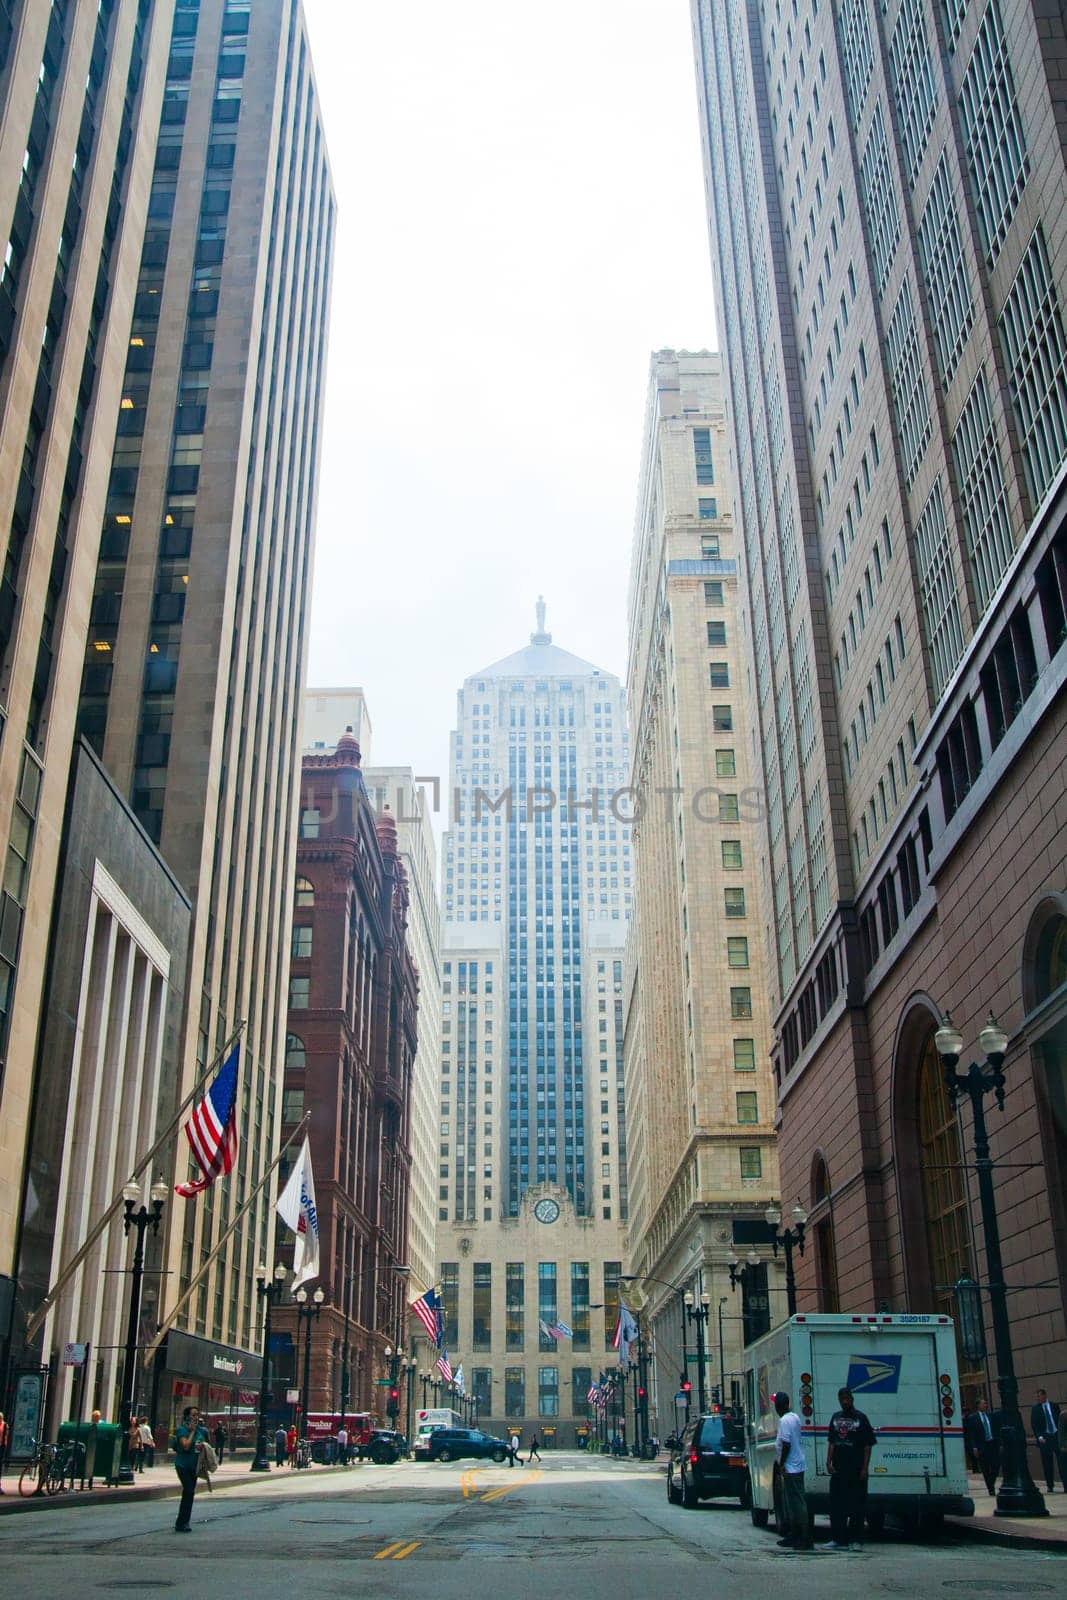 Dynamic Cityscape of Chicago's Downtown: A blend of historic and modern architecture defines the skyline, as a quiet urban street comes alive with daily life activity and American flags waving proudly.